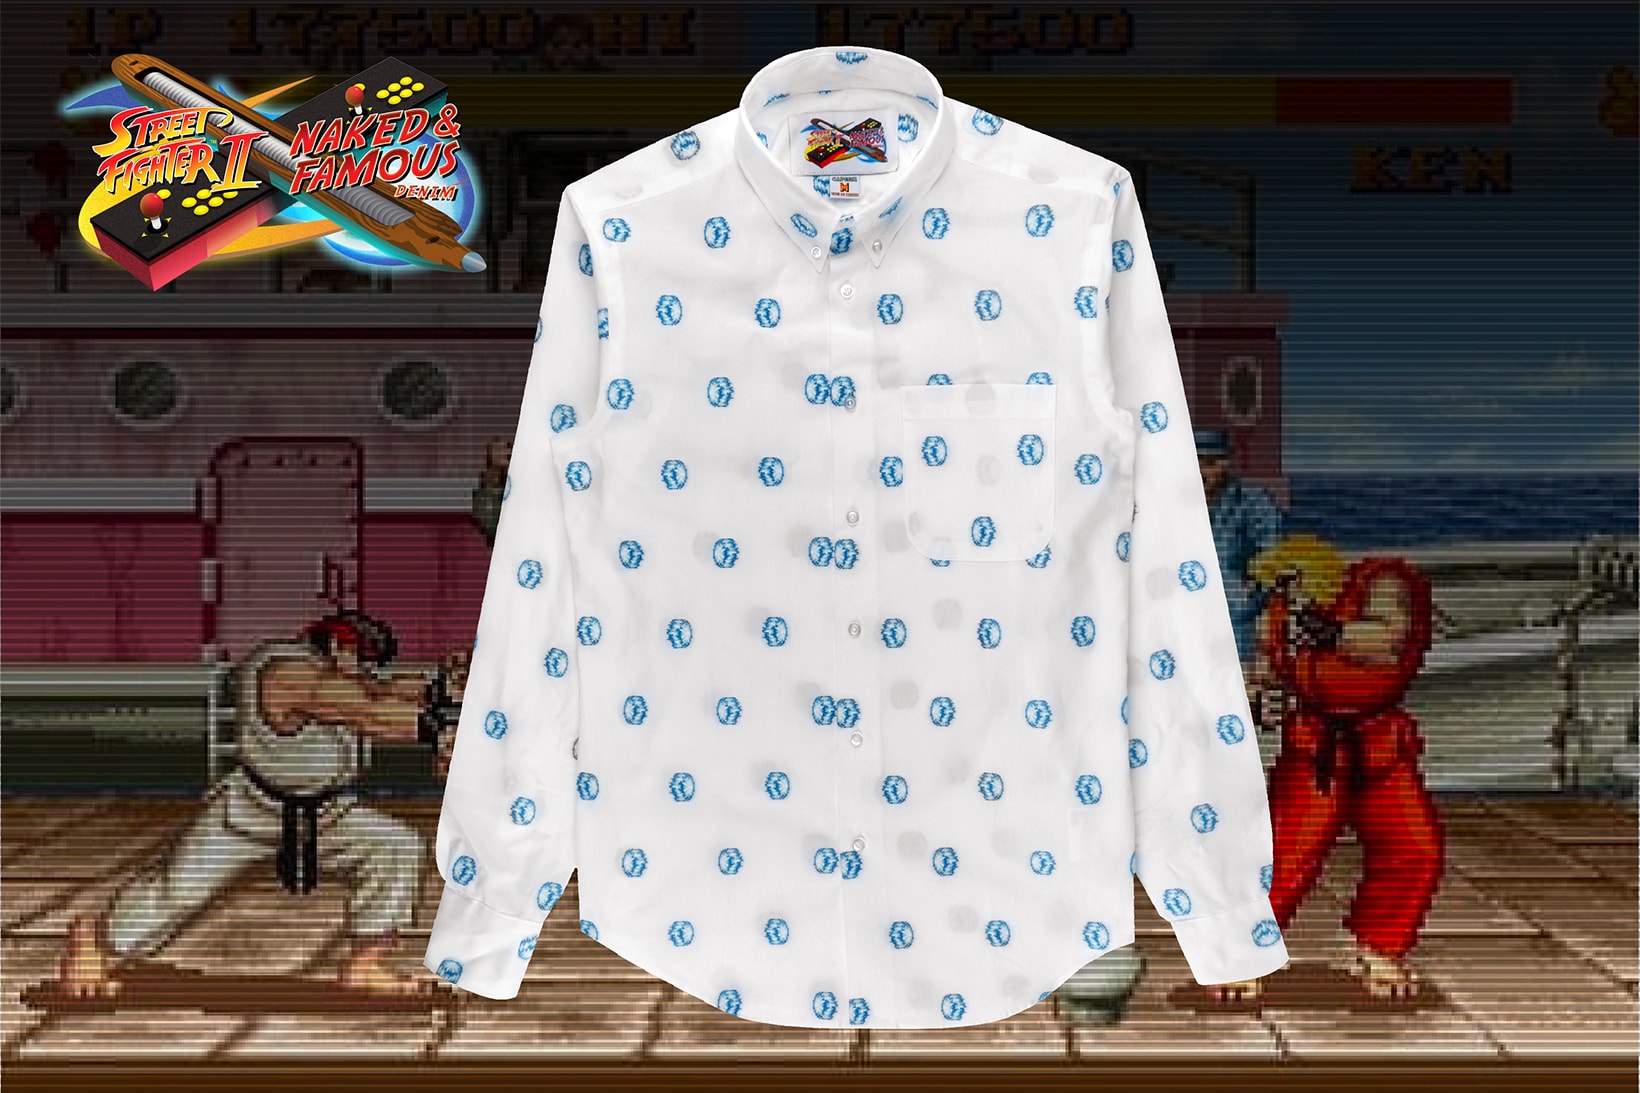 Street Fighter II Naked Famous Round 2 Collaboration collection denim jeans button down up shirts 2018 release date info drop